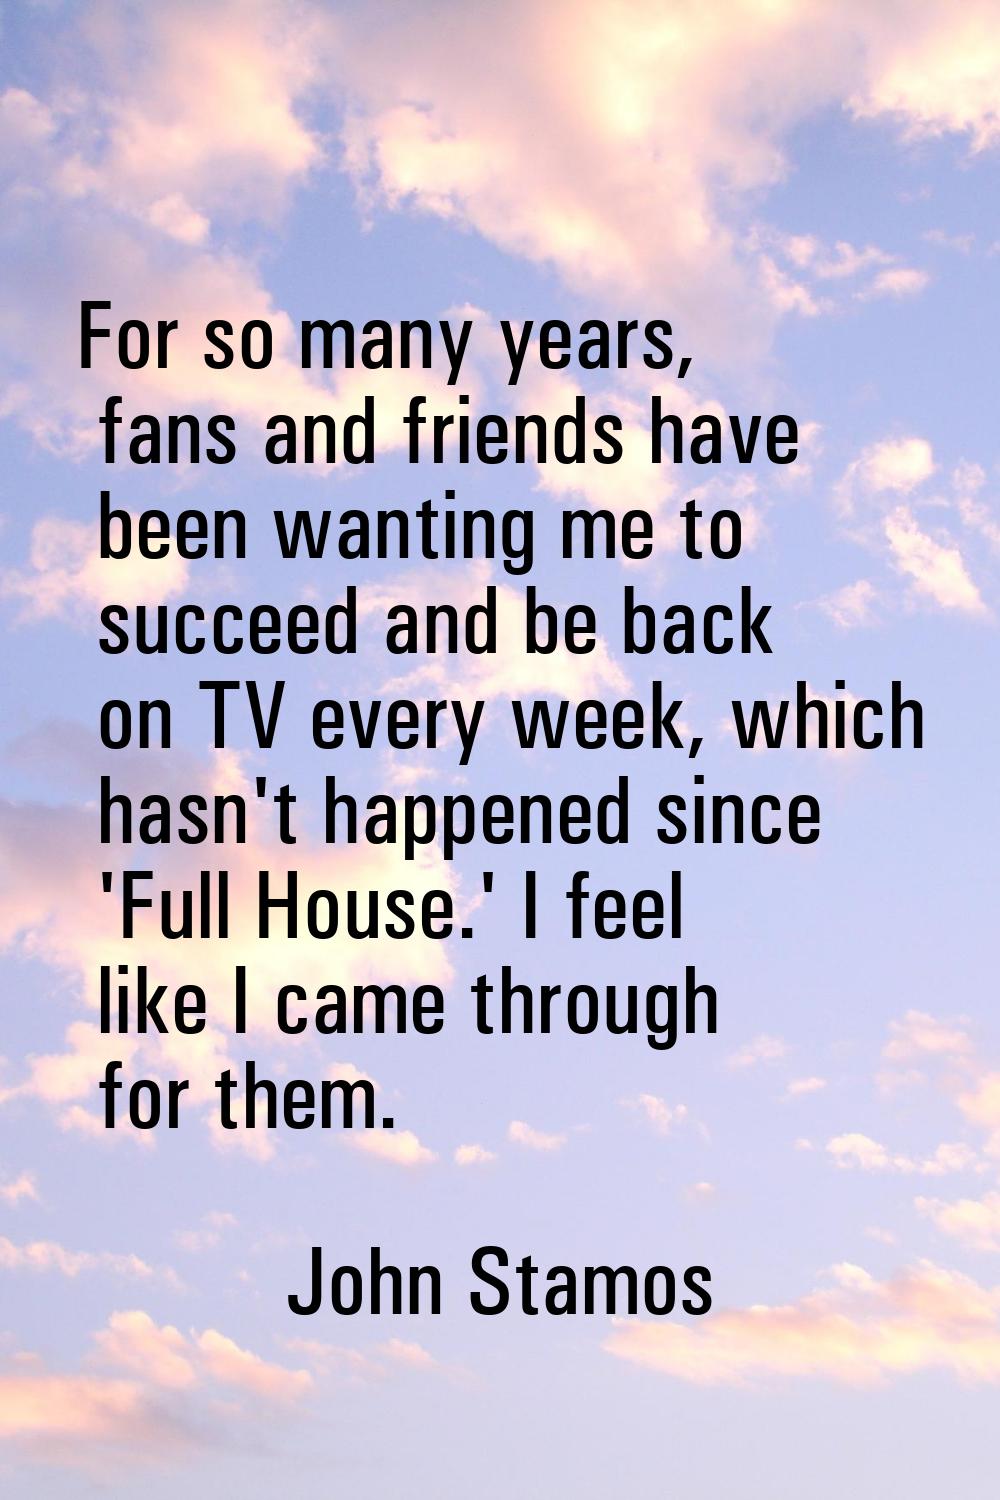 For so many years, fans and friends have been wanting me to succeed and be back on TV every week, w